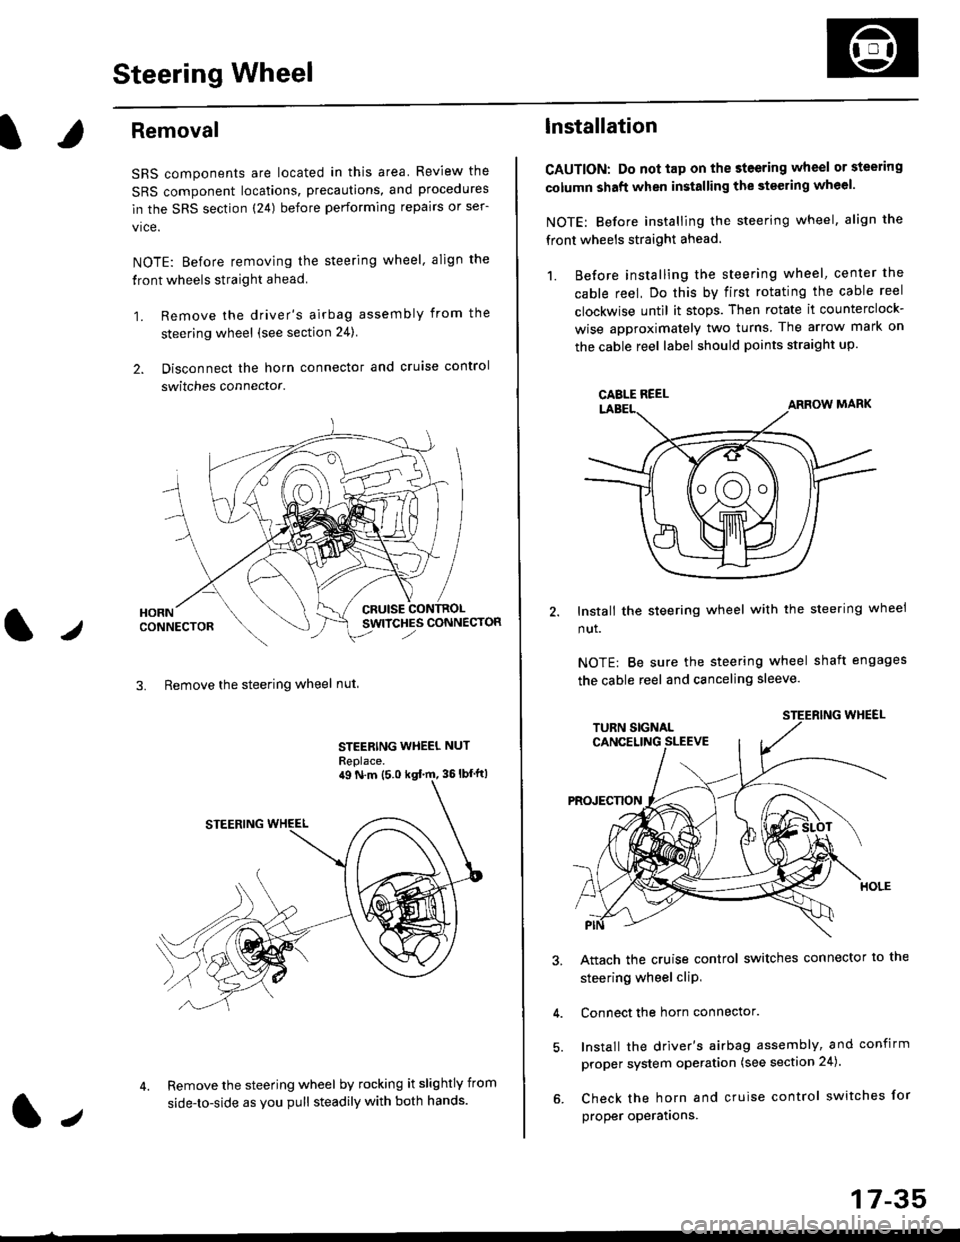 HONDA CIVIC 2000 6.G User Guide Steering Wheel
l,/
Removal
SRS components are located in this area Review the
SRS component locations, precautions, and procedures
in the SRS section (24) before performing repairs or ser-
vice.
NOTE: